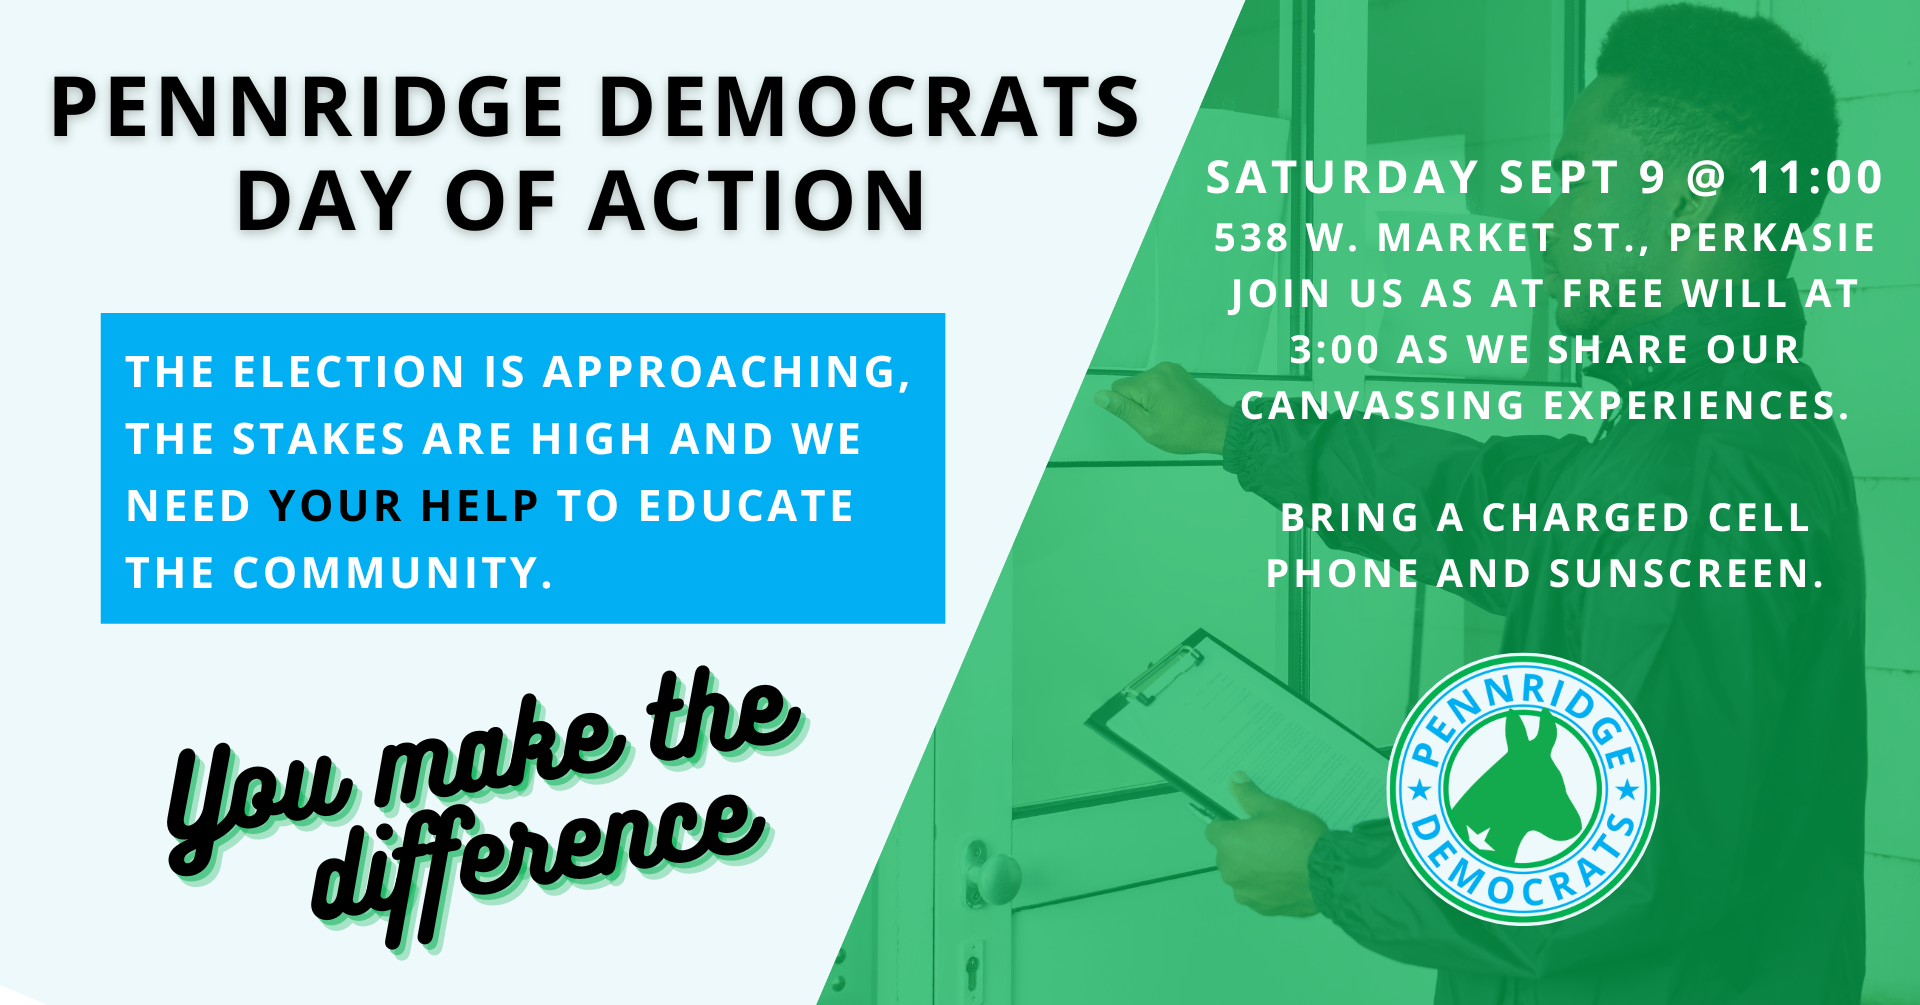 Pennridge Democrats Day of Action - September 9 at 11:00 am